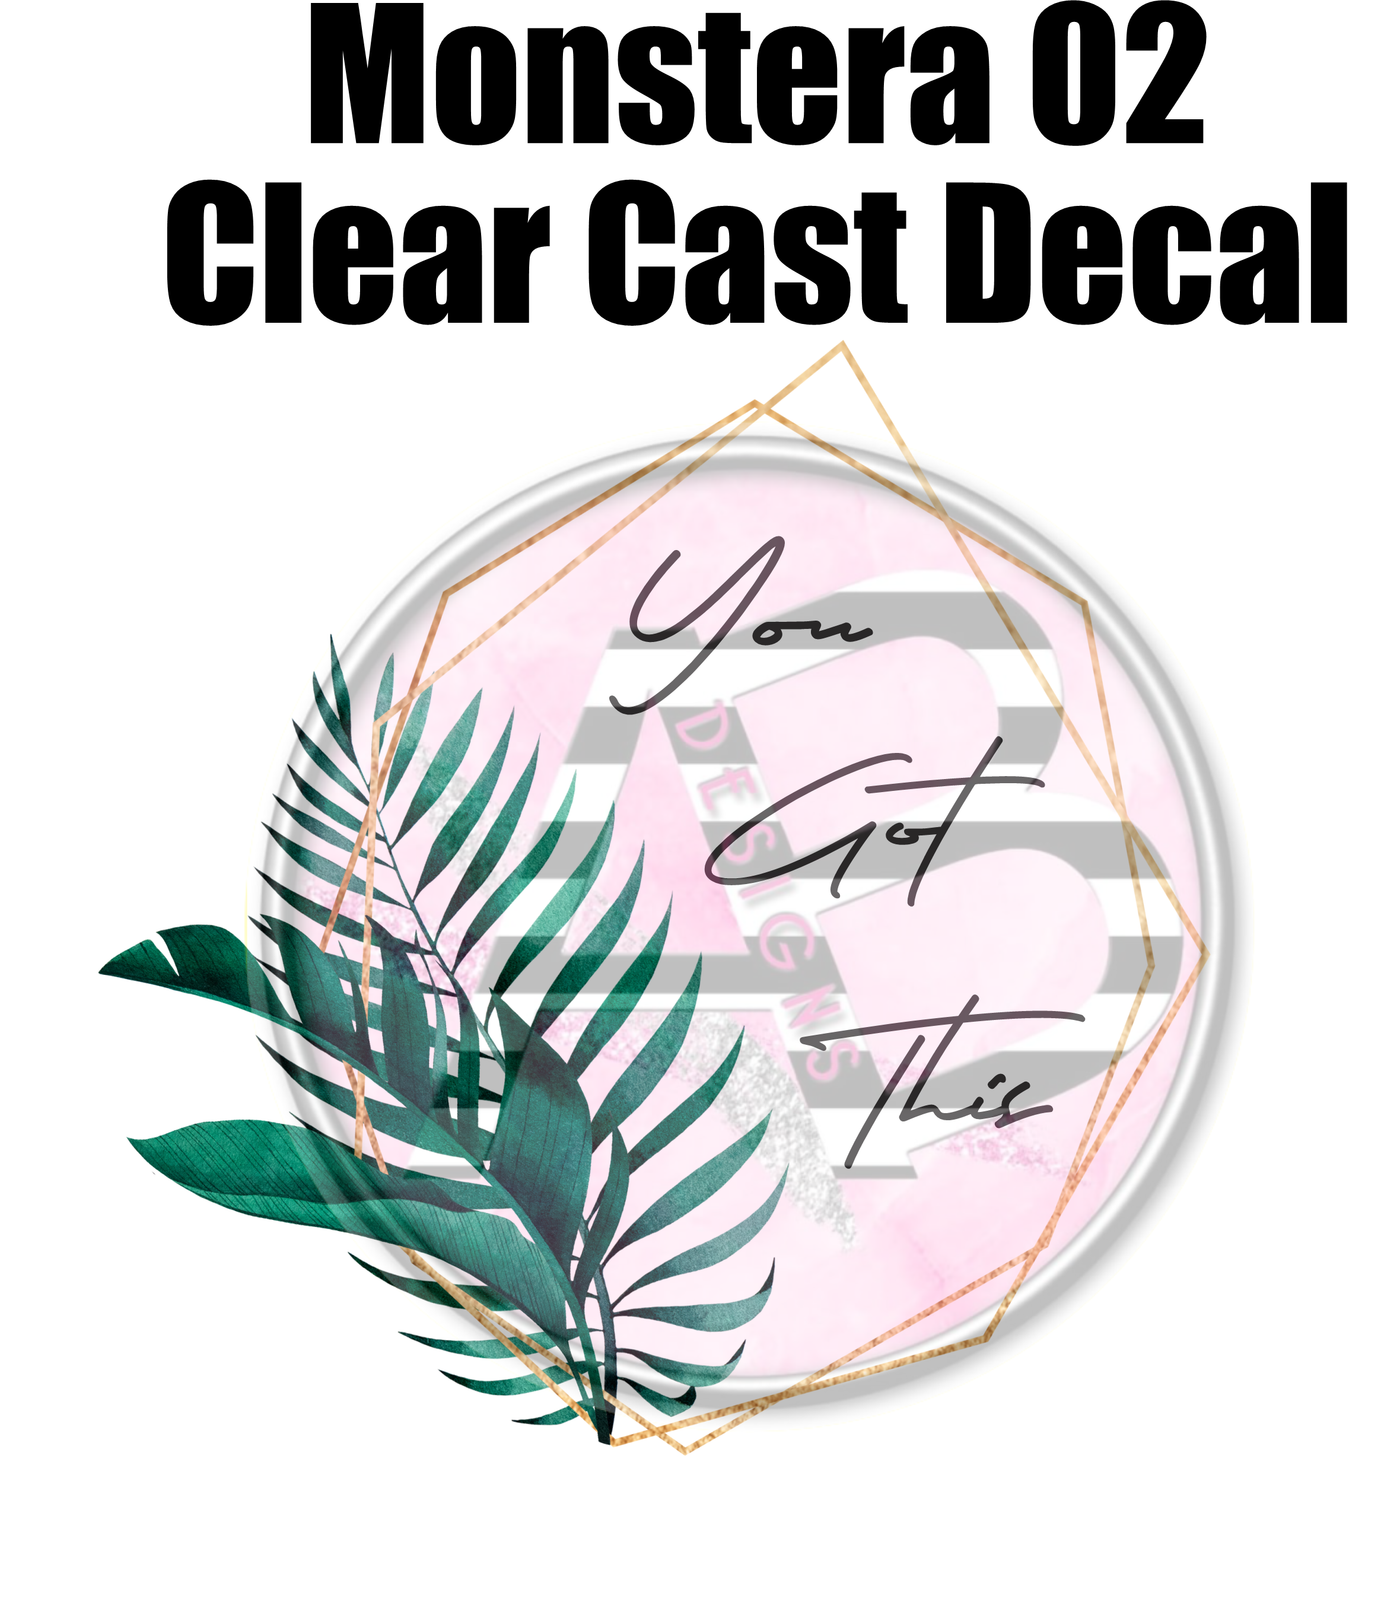 Monstera 02 - Clear Cast Decal